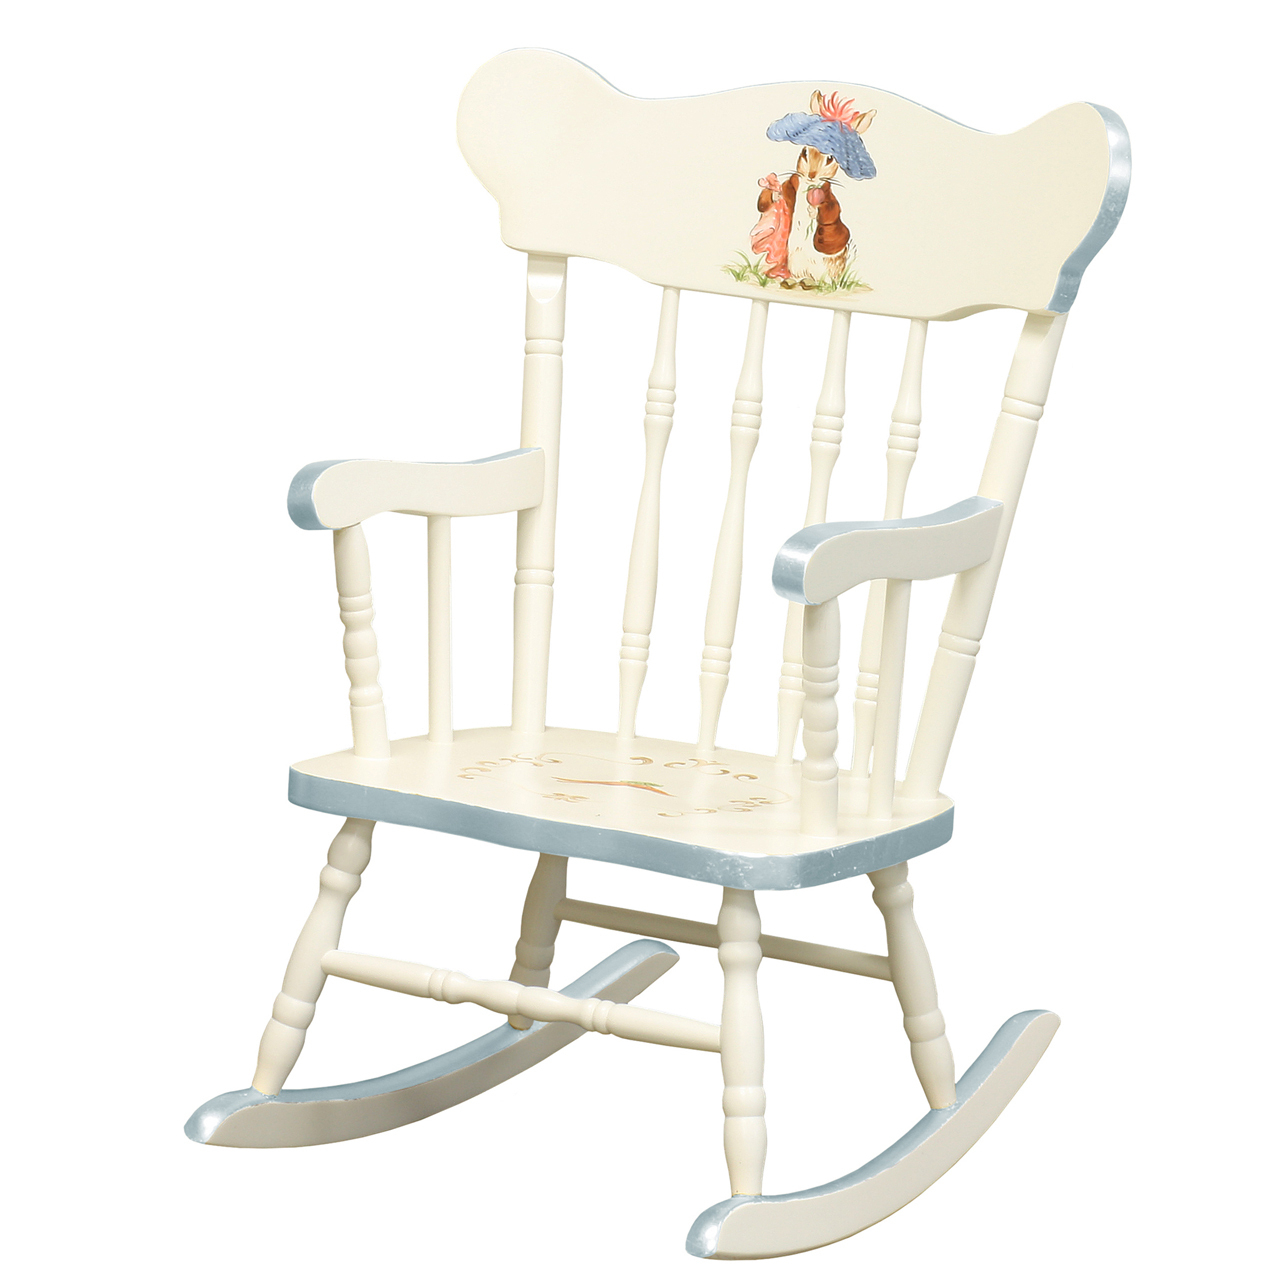 Lovely childs rocking chair for childrens furniture classic